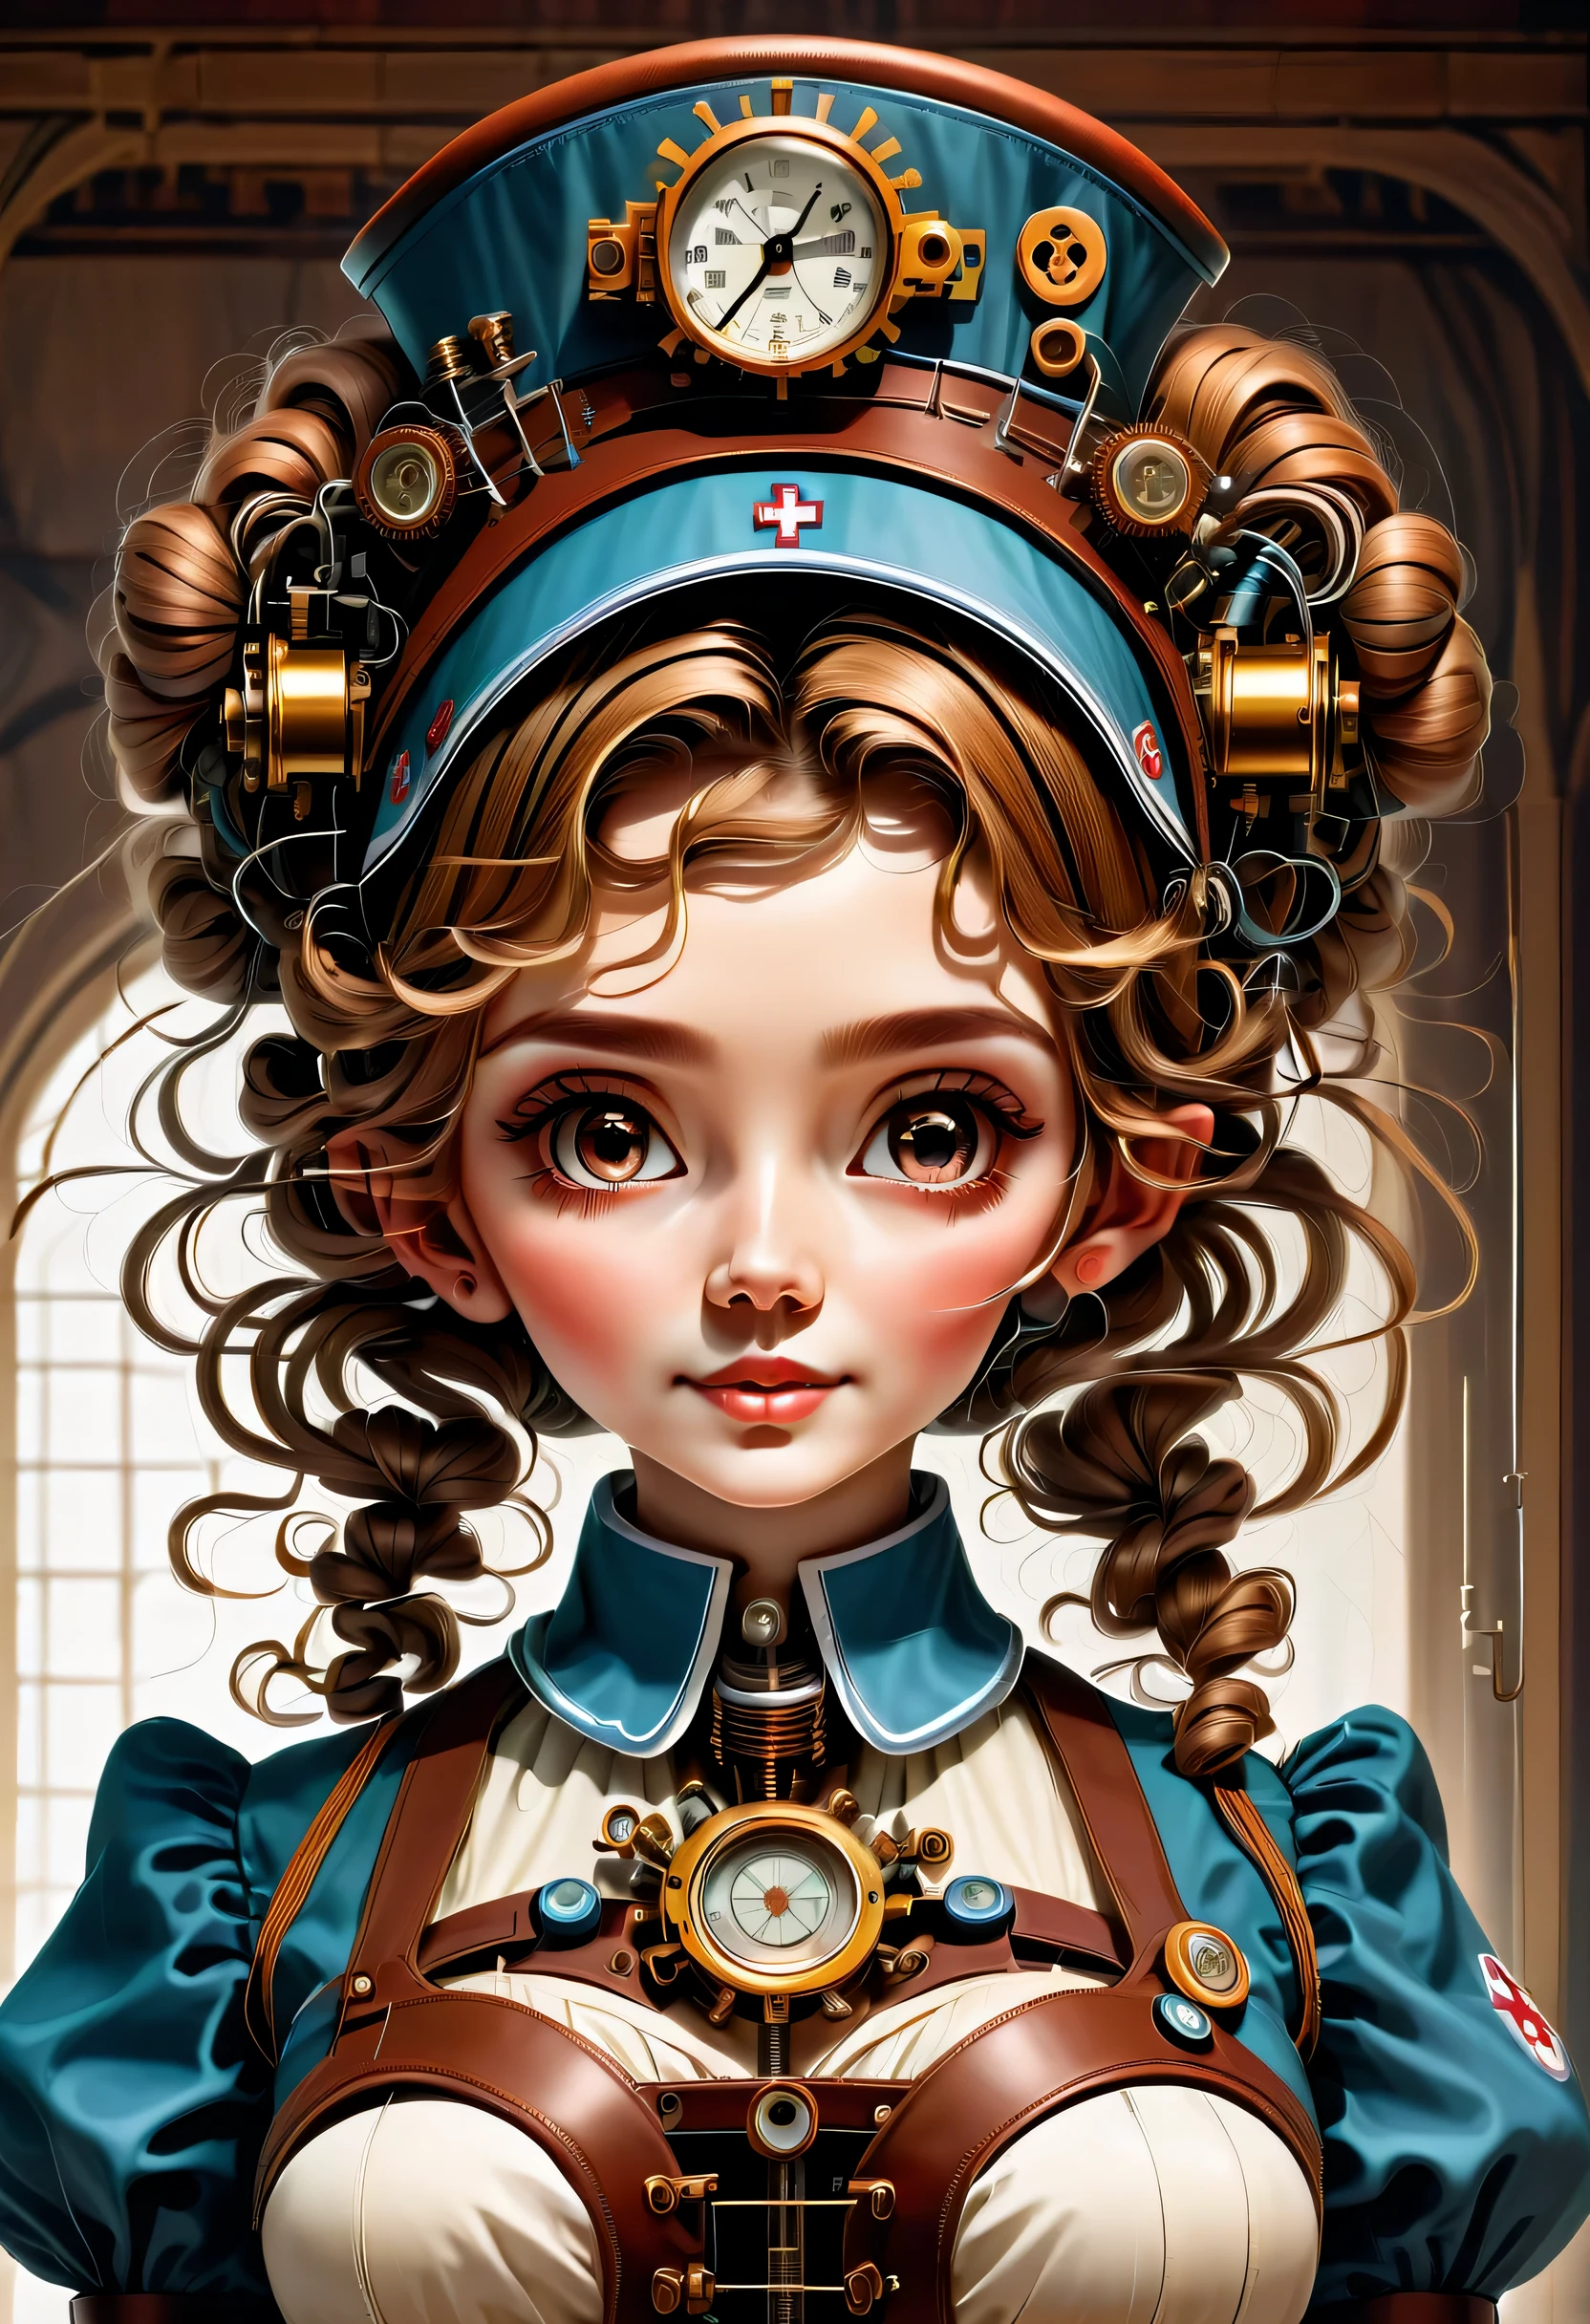 mechanism:humanoid:nurse:16th century European nurse uniform:whole body,doll face:perfect face:big brown eyes,eyelash,hide hair wires,she is made of machinery,Steampunk element,Mechanical engineering,Mechanically,Mechanical,pop,cute,intricate details,very fine,High resolution,high quality,最high quality,clearly,Be clear,beautiful light and shadow,Three dimensions,adorable appearance,complex configuration,mechanism,dynamic,busy,Work hard,An expression that makes you want to support,Medical equipment,medical supplies shelf,vial,show evidence that it is a machine,light from window